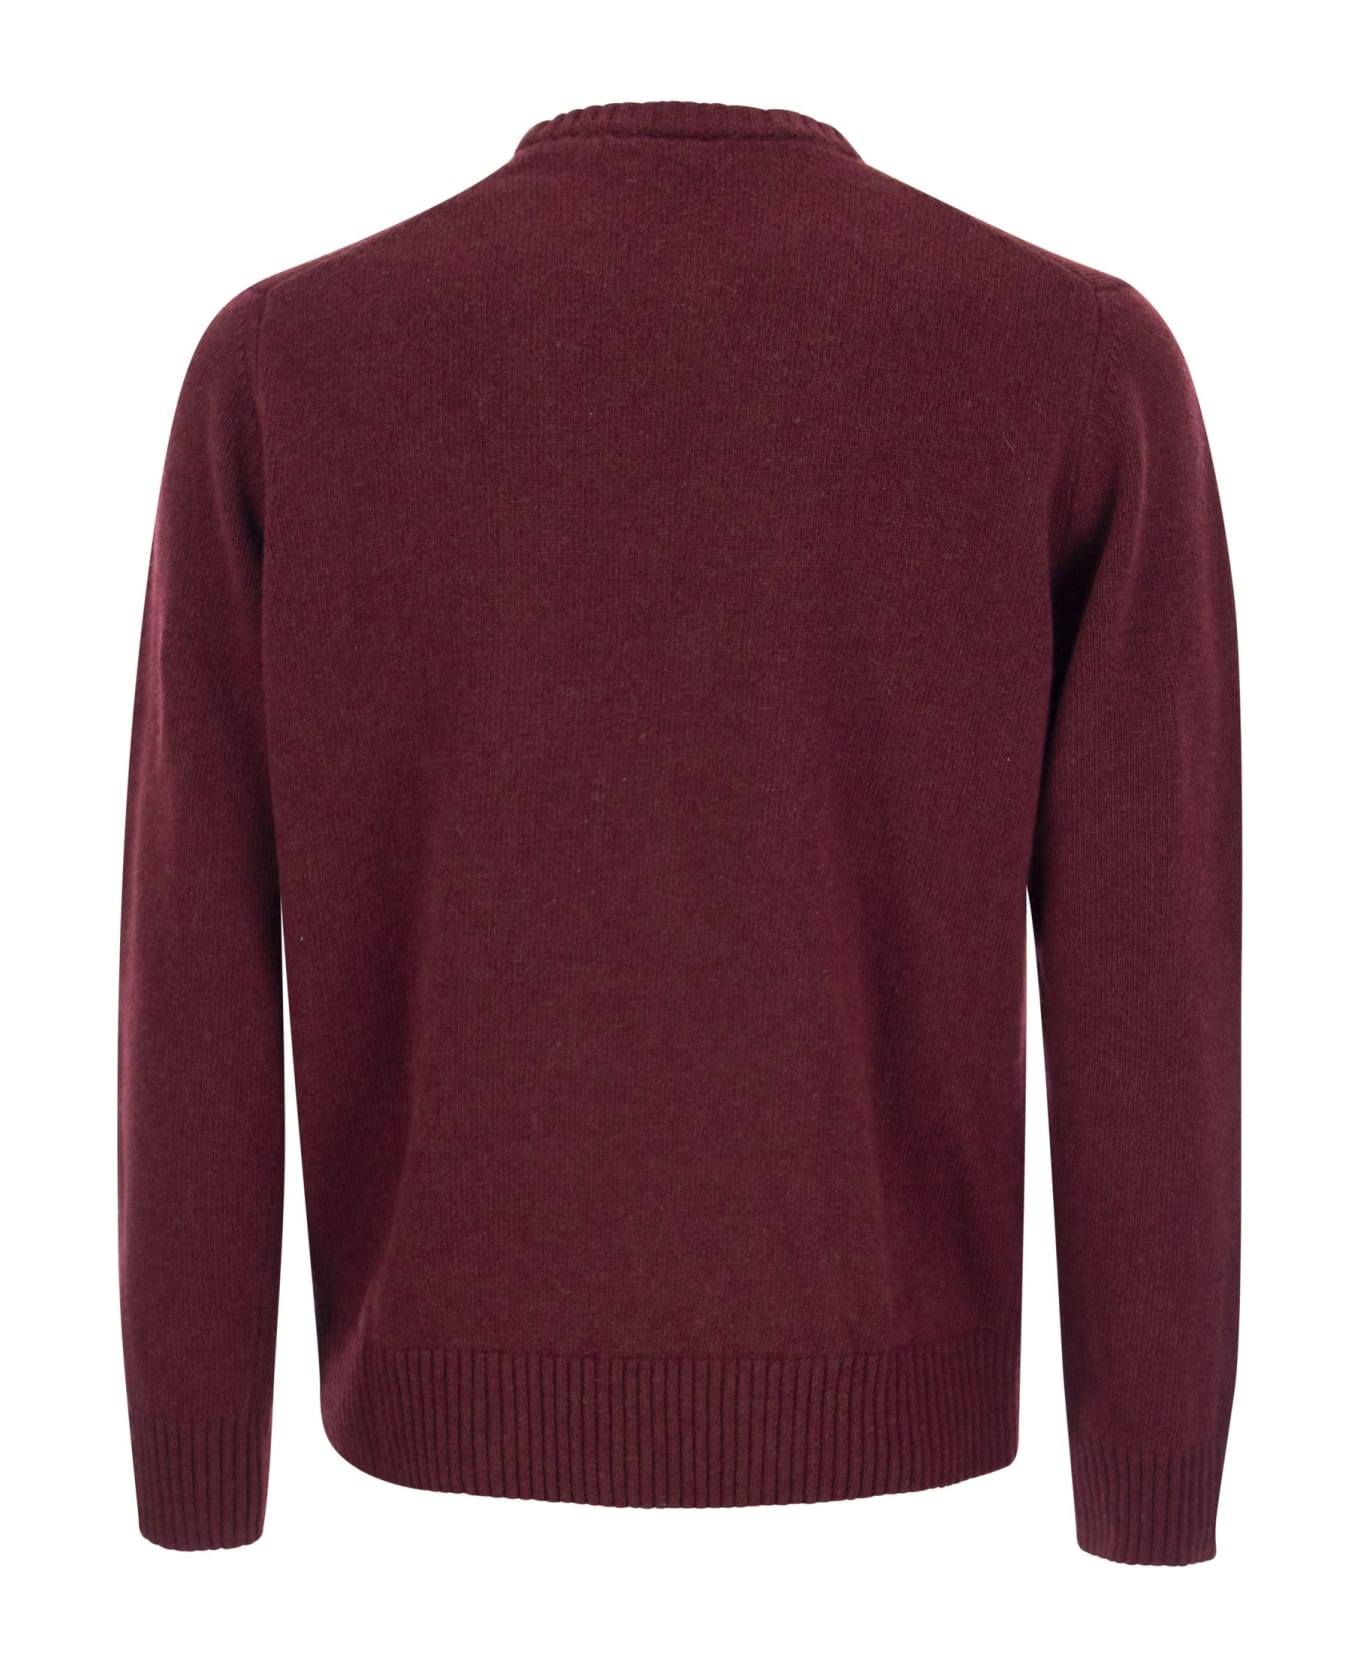 Paul&Shark Wool Crew Neck With Arm Patch - Bordeaux ニットウェア